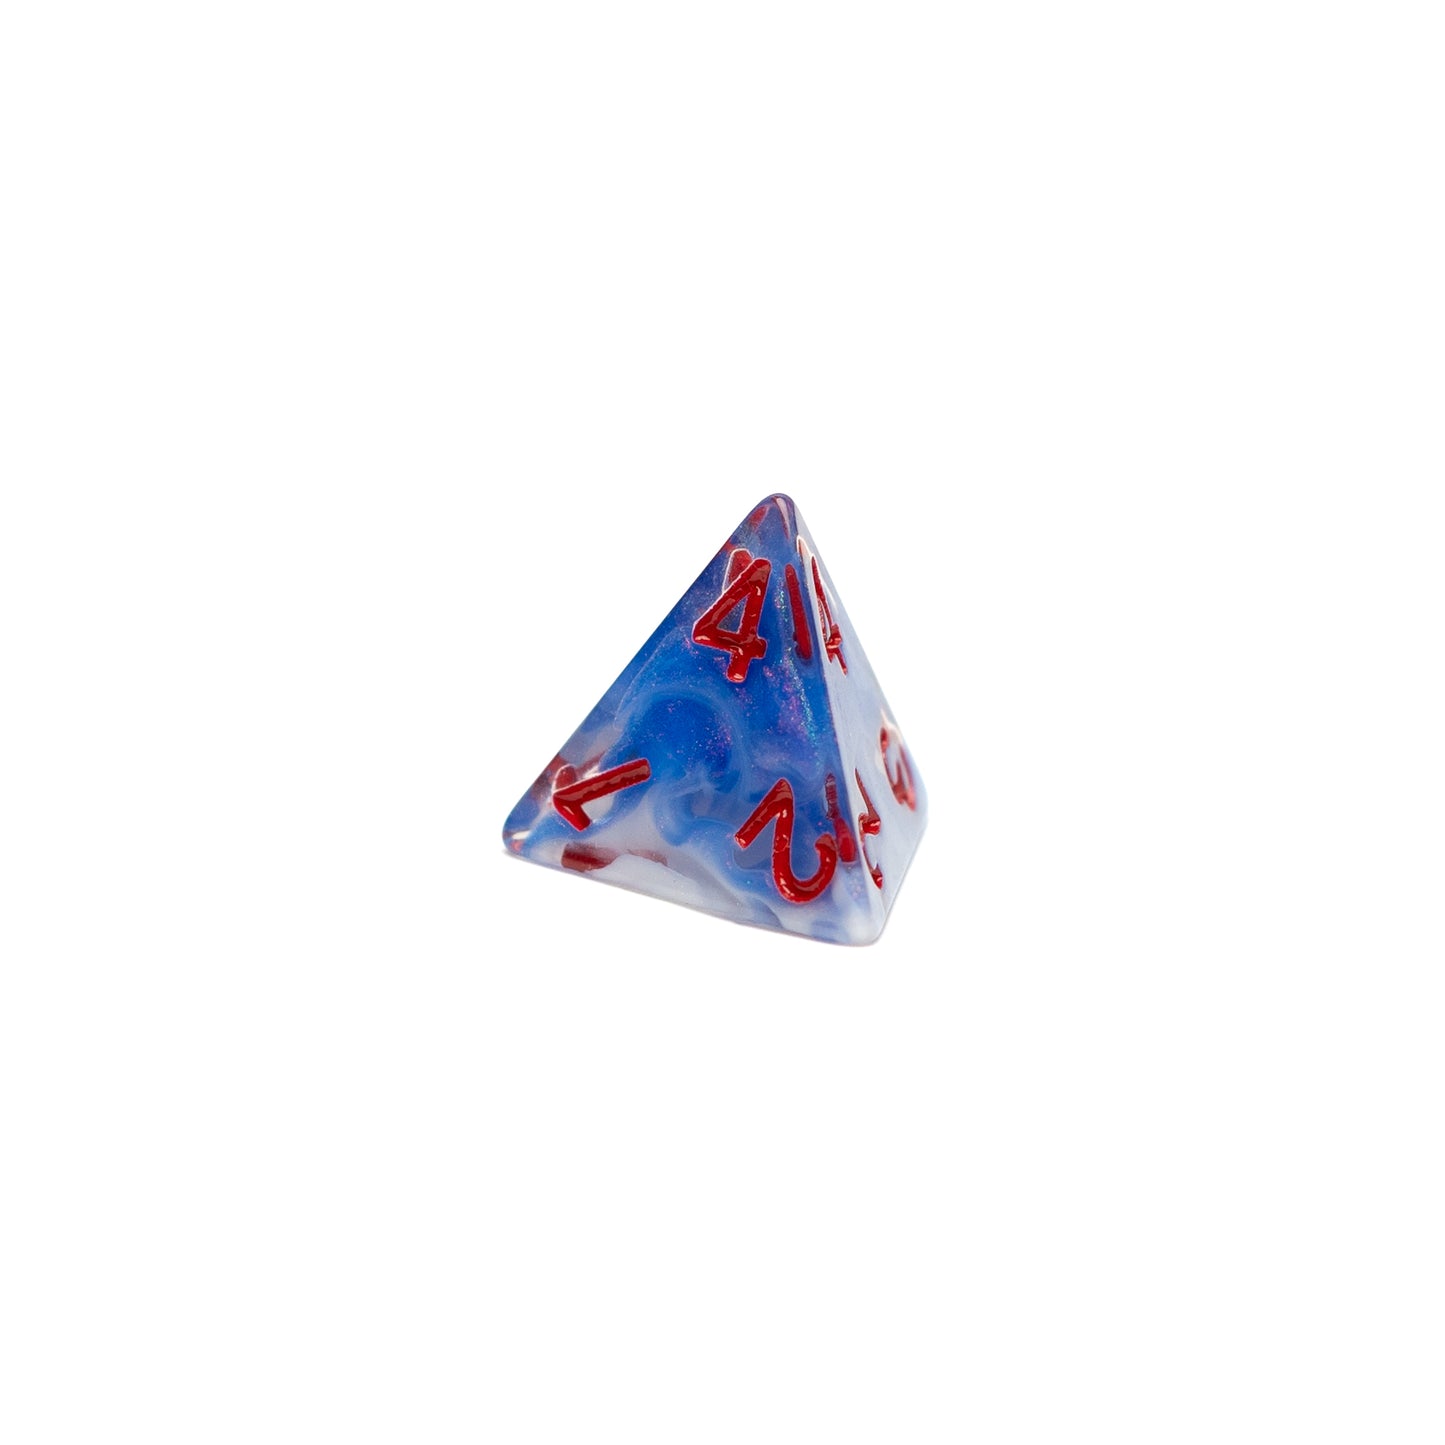 Roll Britannia Acrylic Dungeons and Dragons D4 Dice with Red and Blue Ocean Aesthetic